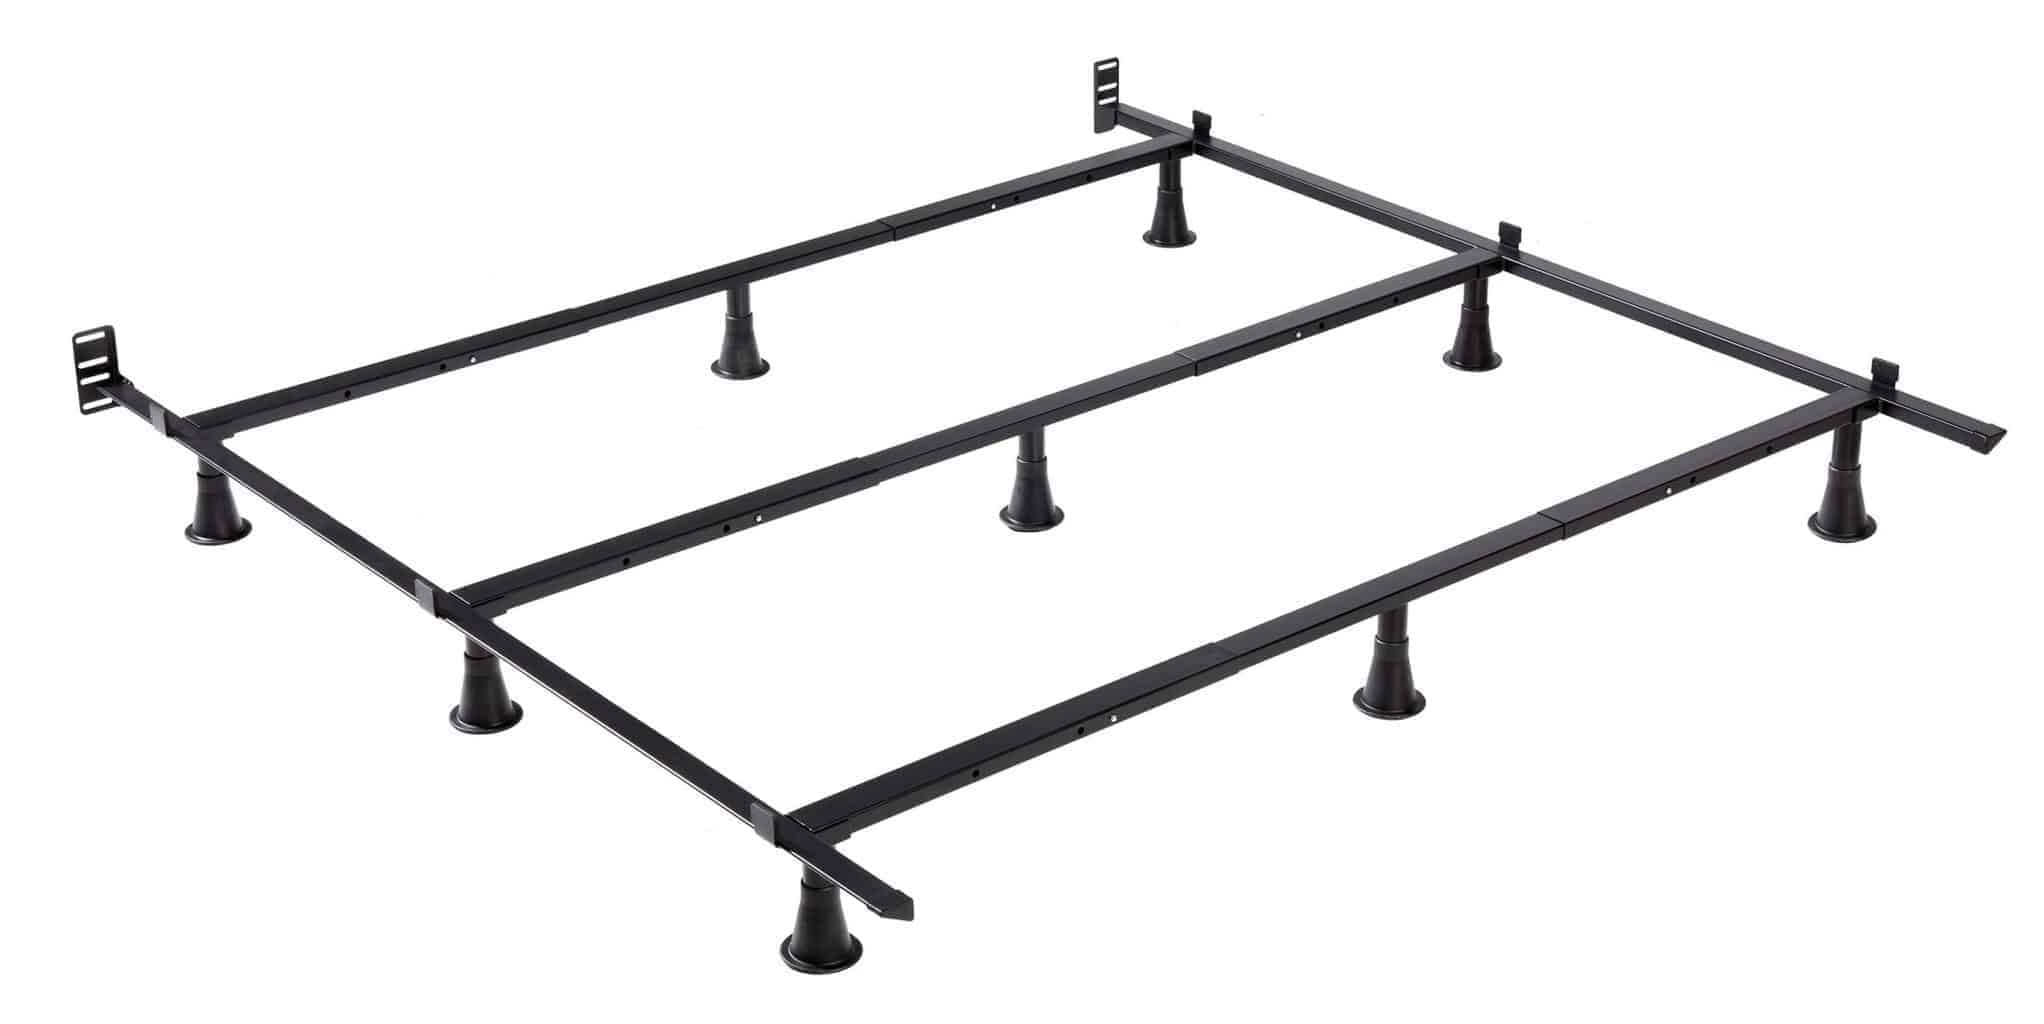 Leggett and Platt metal bed frame with glides and pushpin assembly